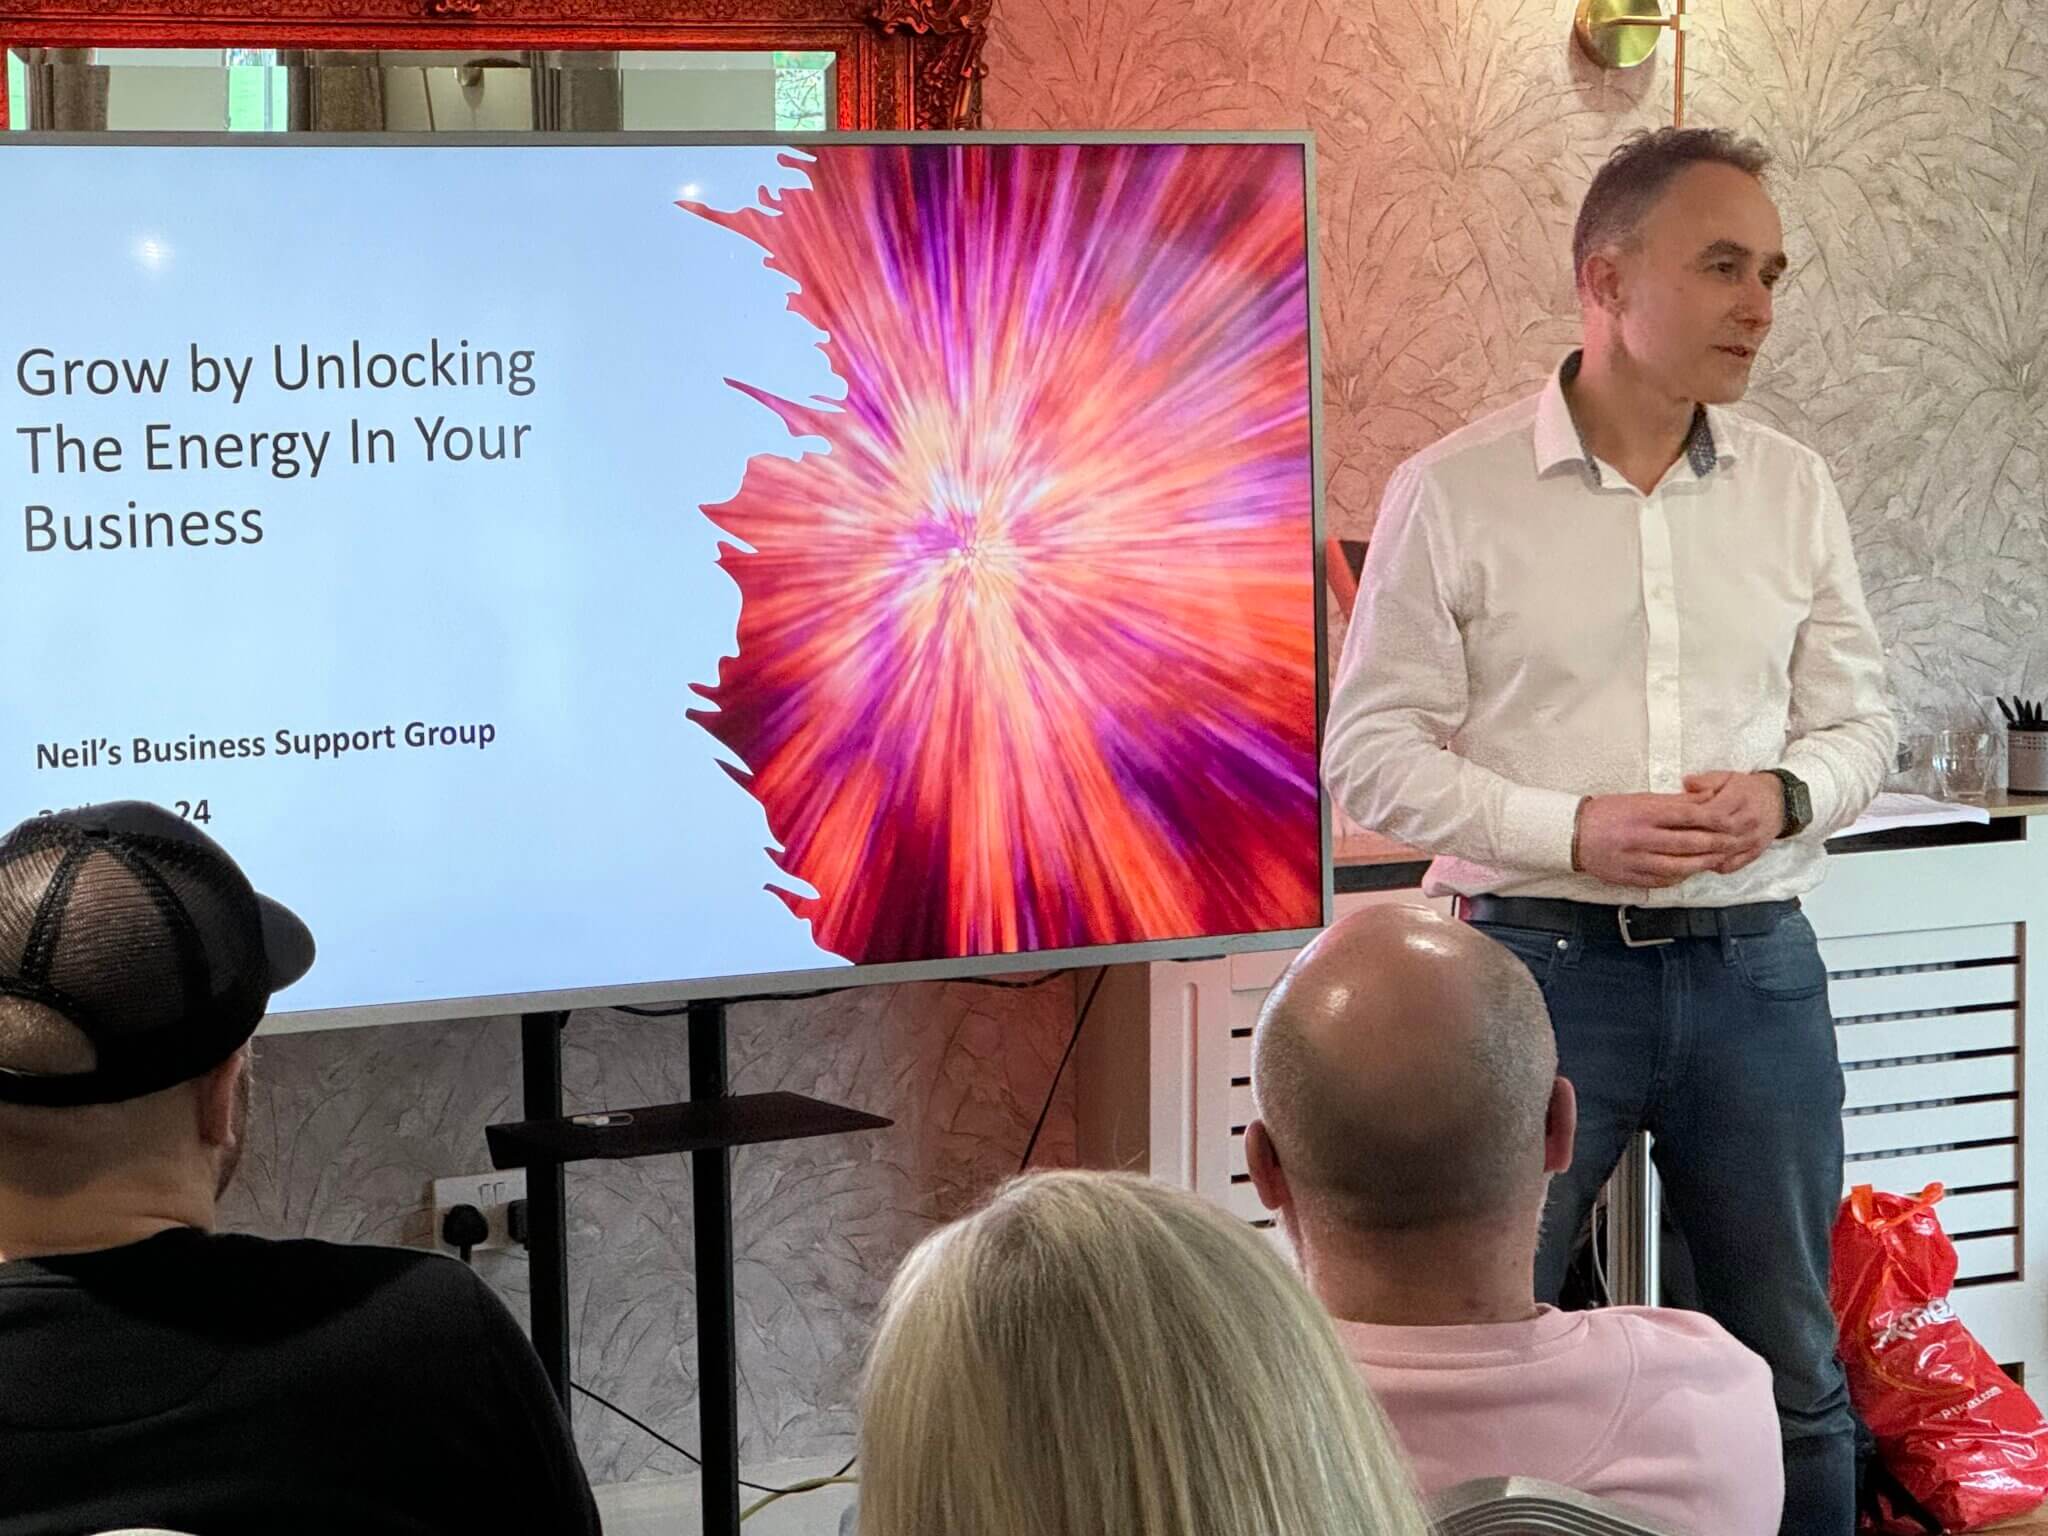 Chris Cooper speaking in Brighton to c30 CEO's at Neil Laughton's (adventurer and serial entrepreneur) Business Support Group in Brighton